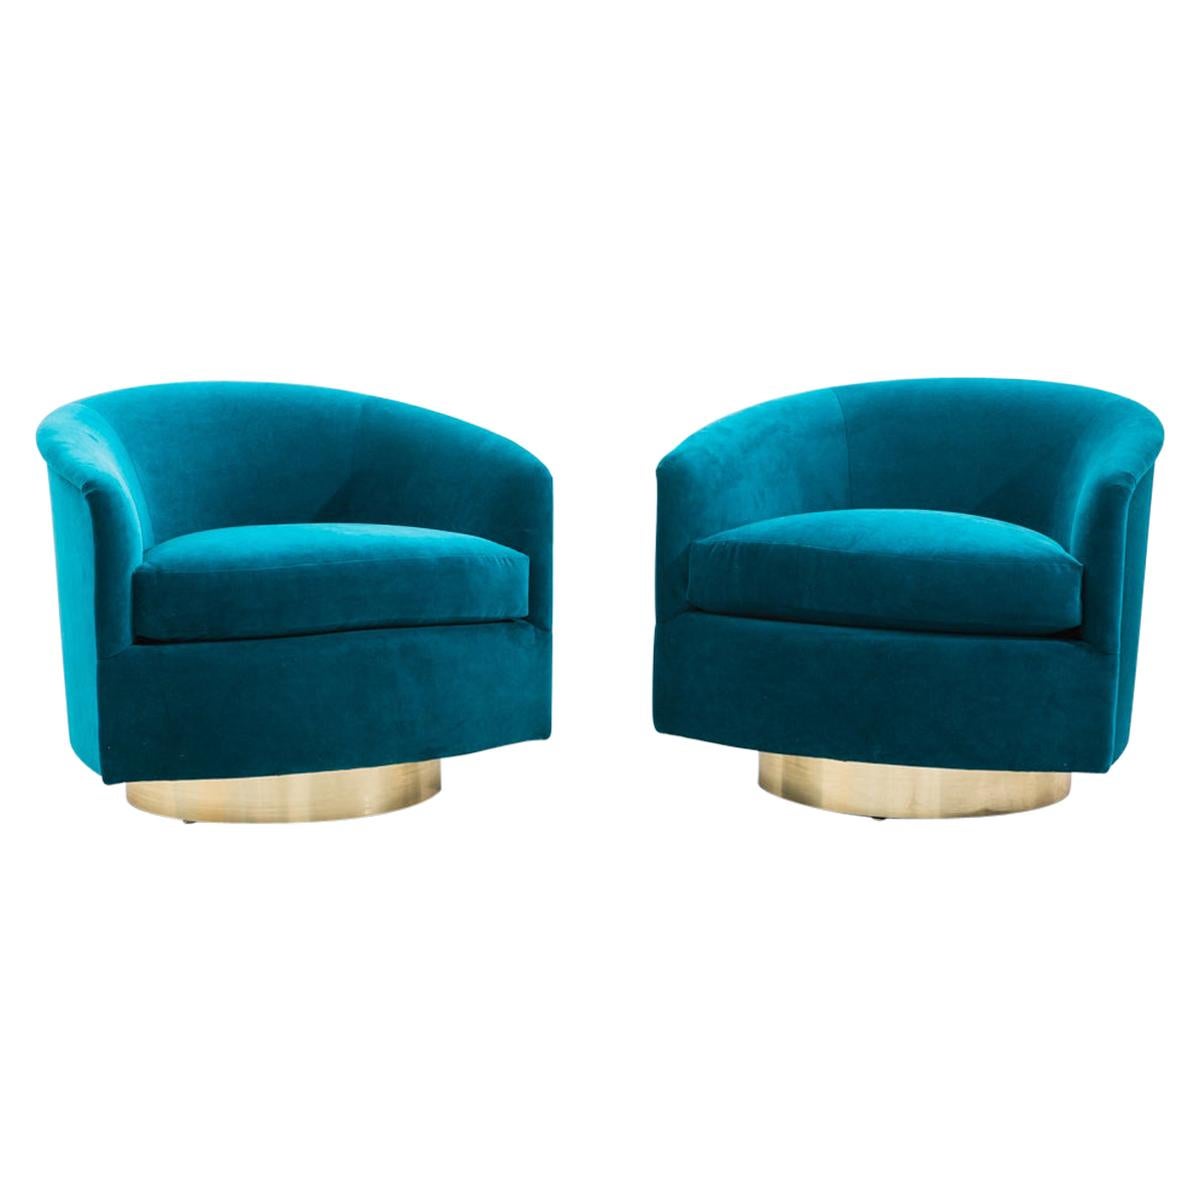 Milo Baughman, Pair of Dark Teal Swivel Chairs with Gold Base, USA